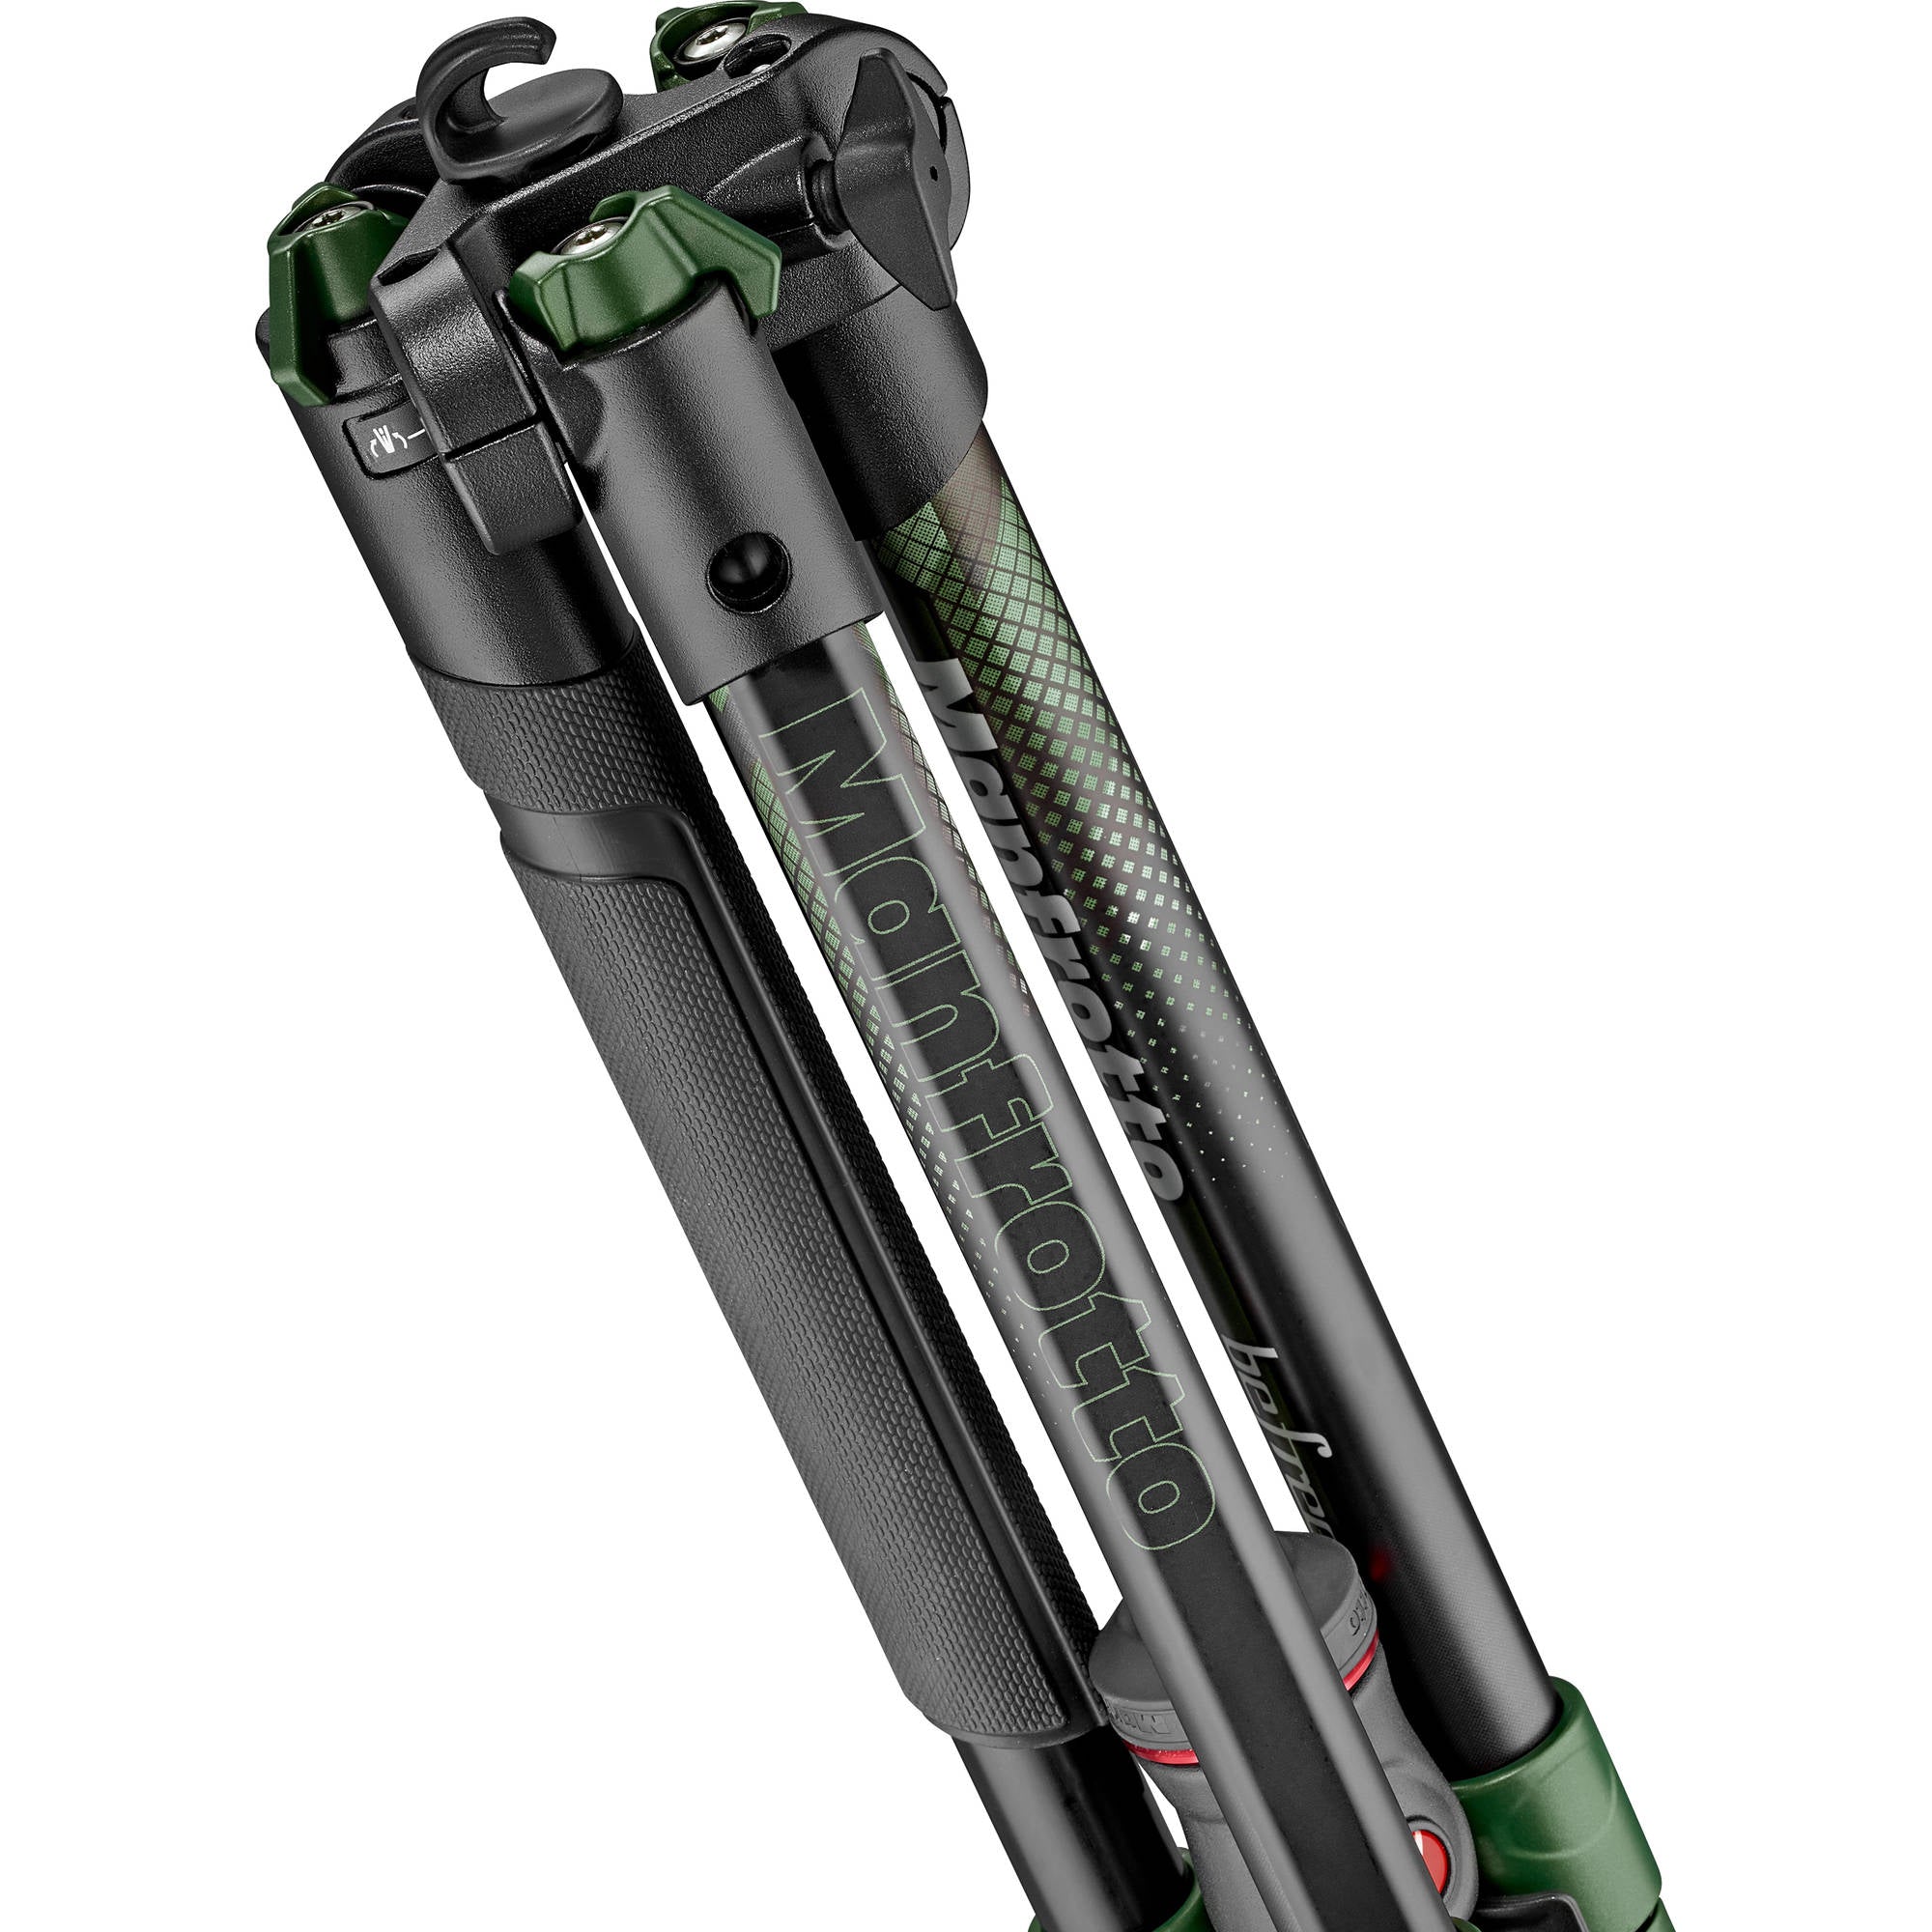 Manfrotto BeFree Color Aluminum Travel Tripod (Green)